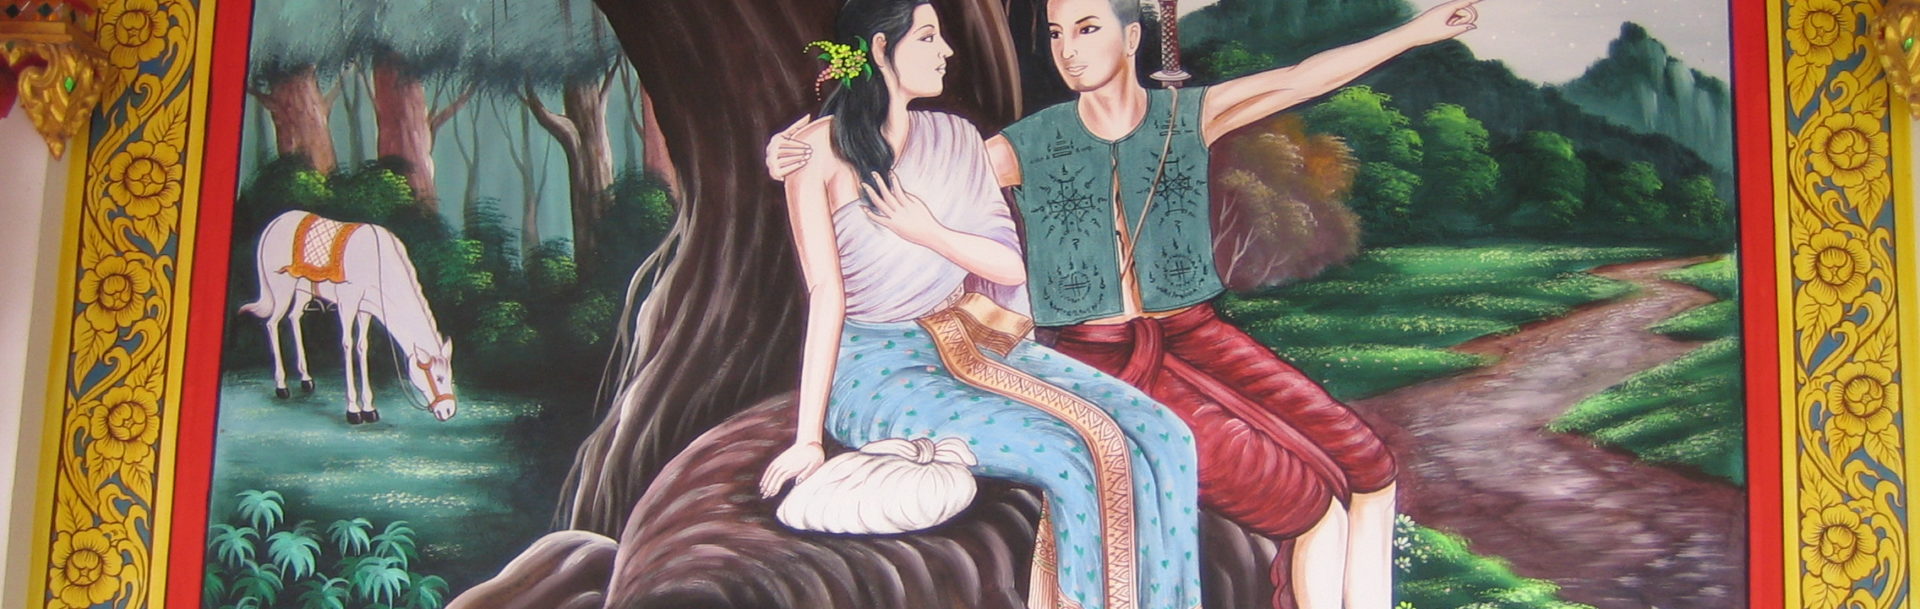 Mural of Khun Phaen and Wanthong in the forest.